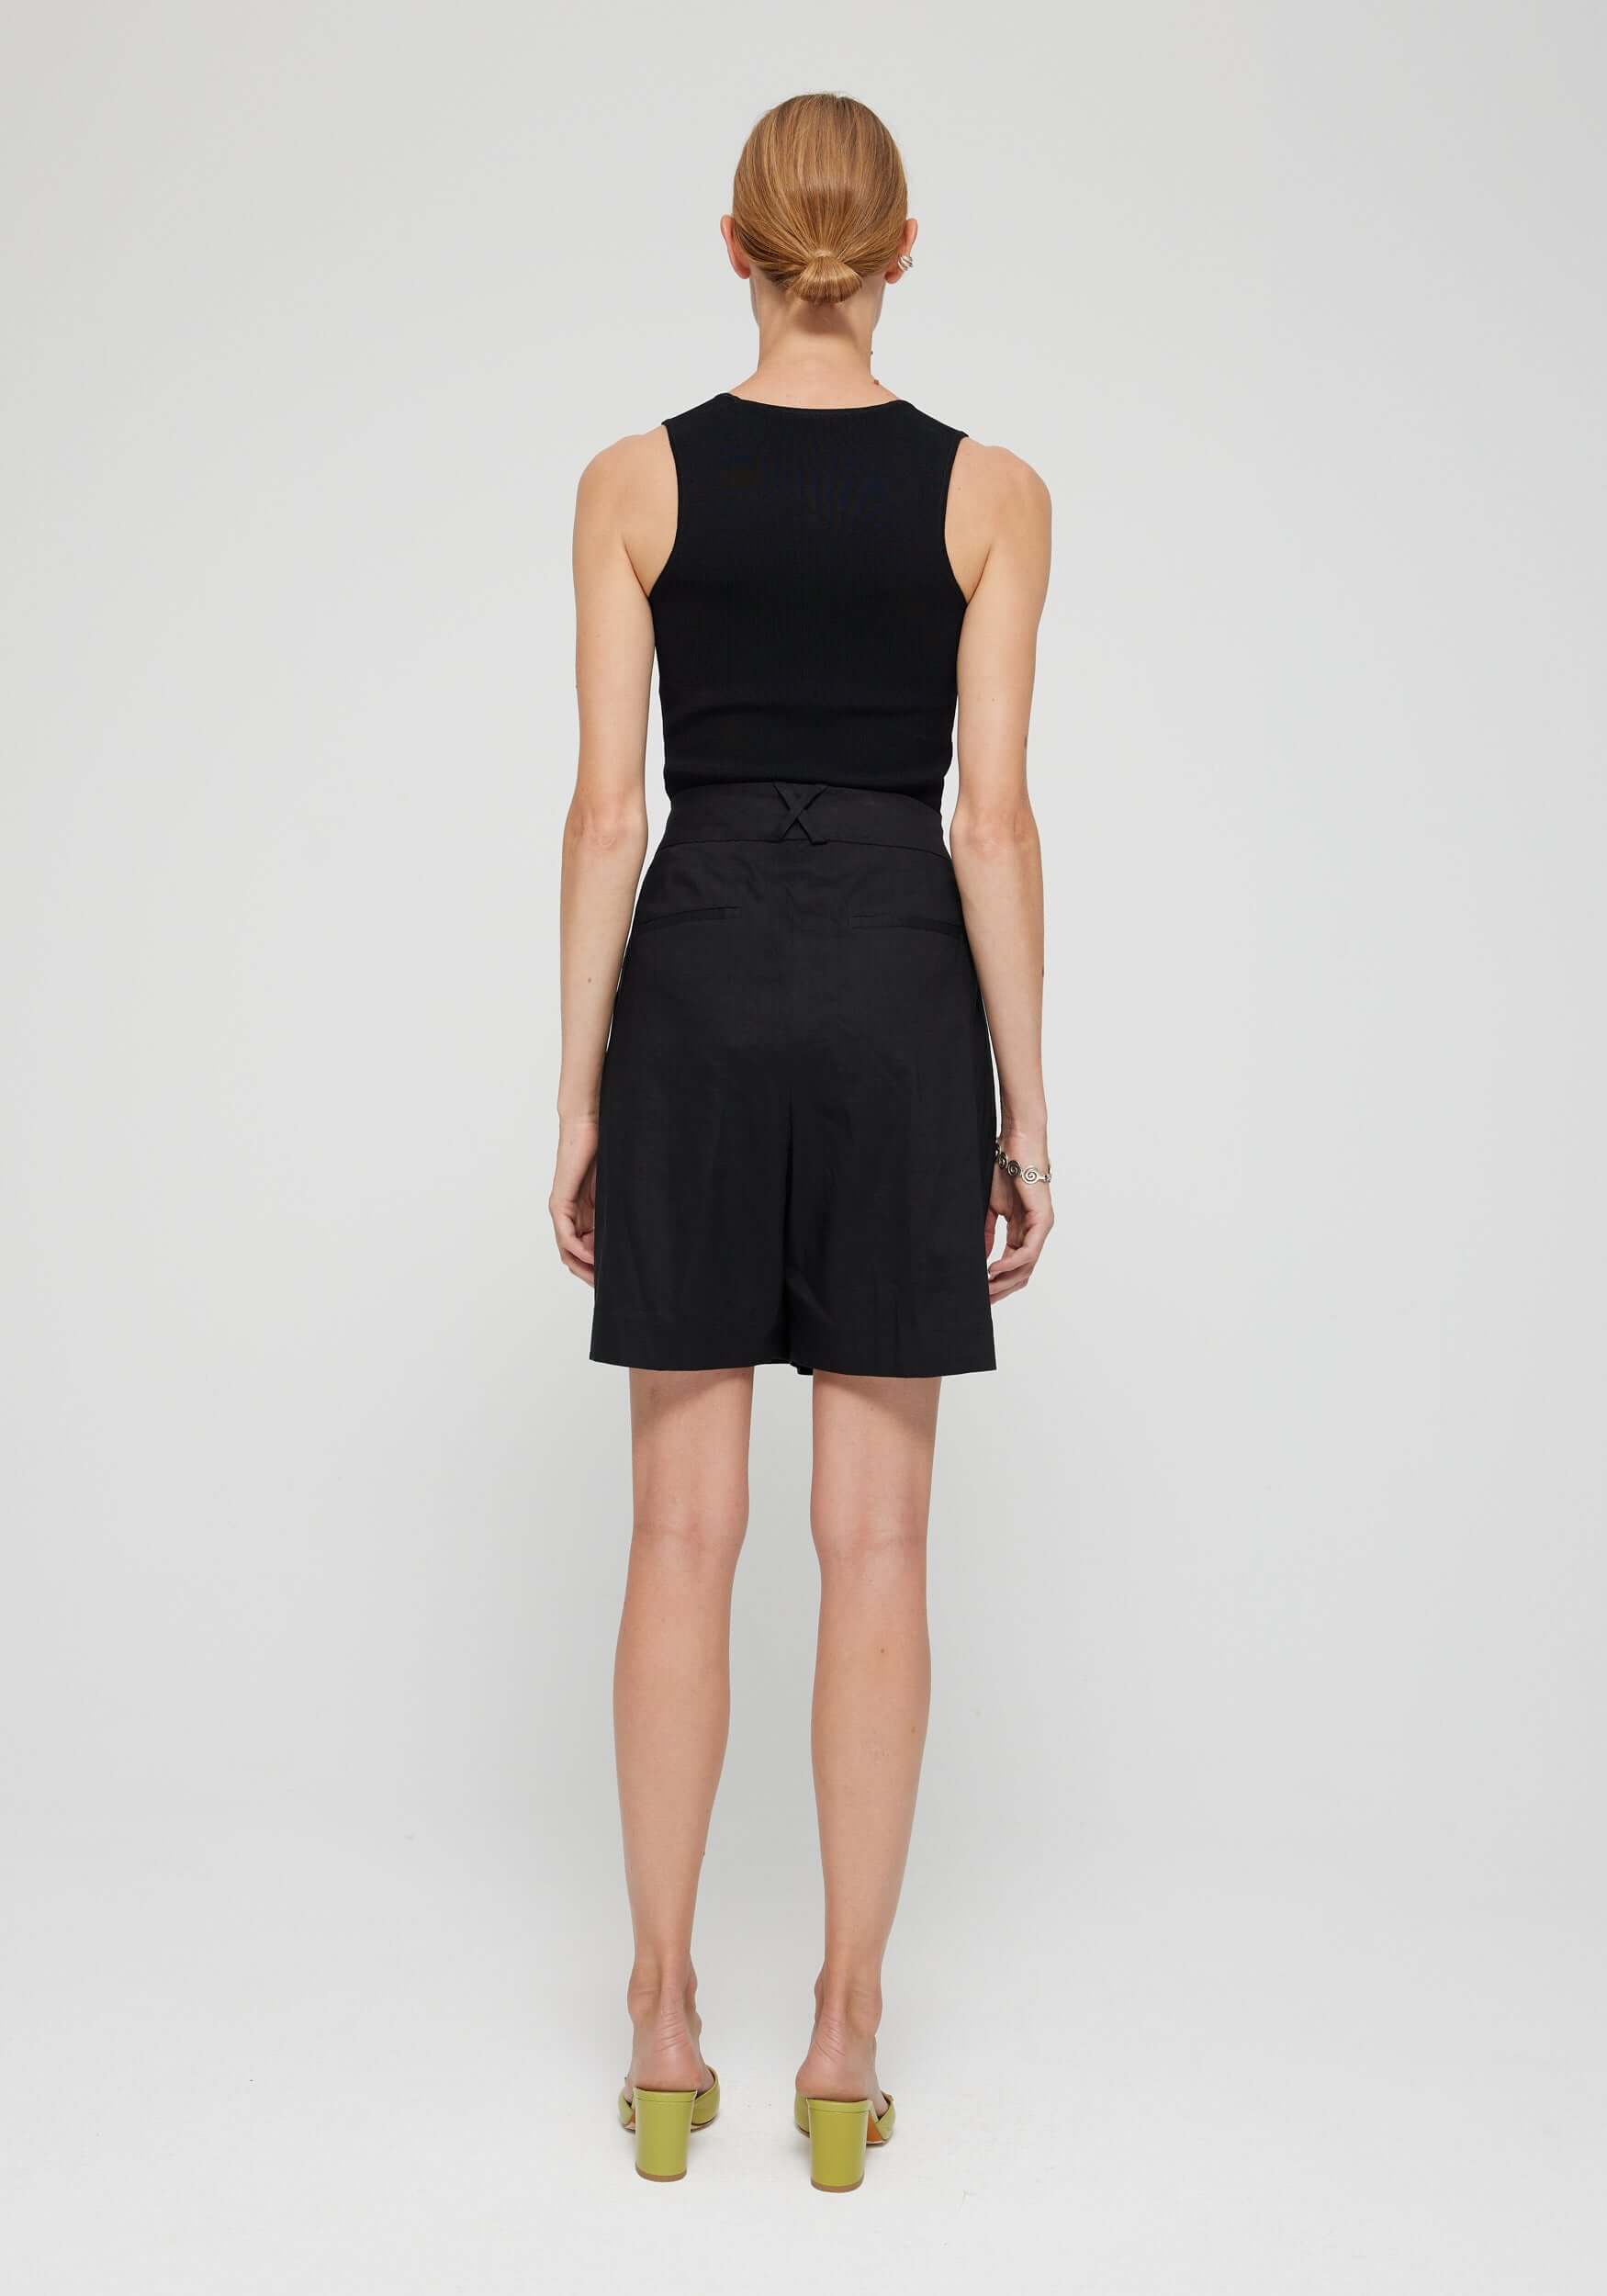 Rohe Bustier Shaped Knitted Top in Noir available at TNT The New Trend Australia. Free shipping on orders over $300 AUD.